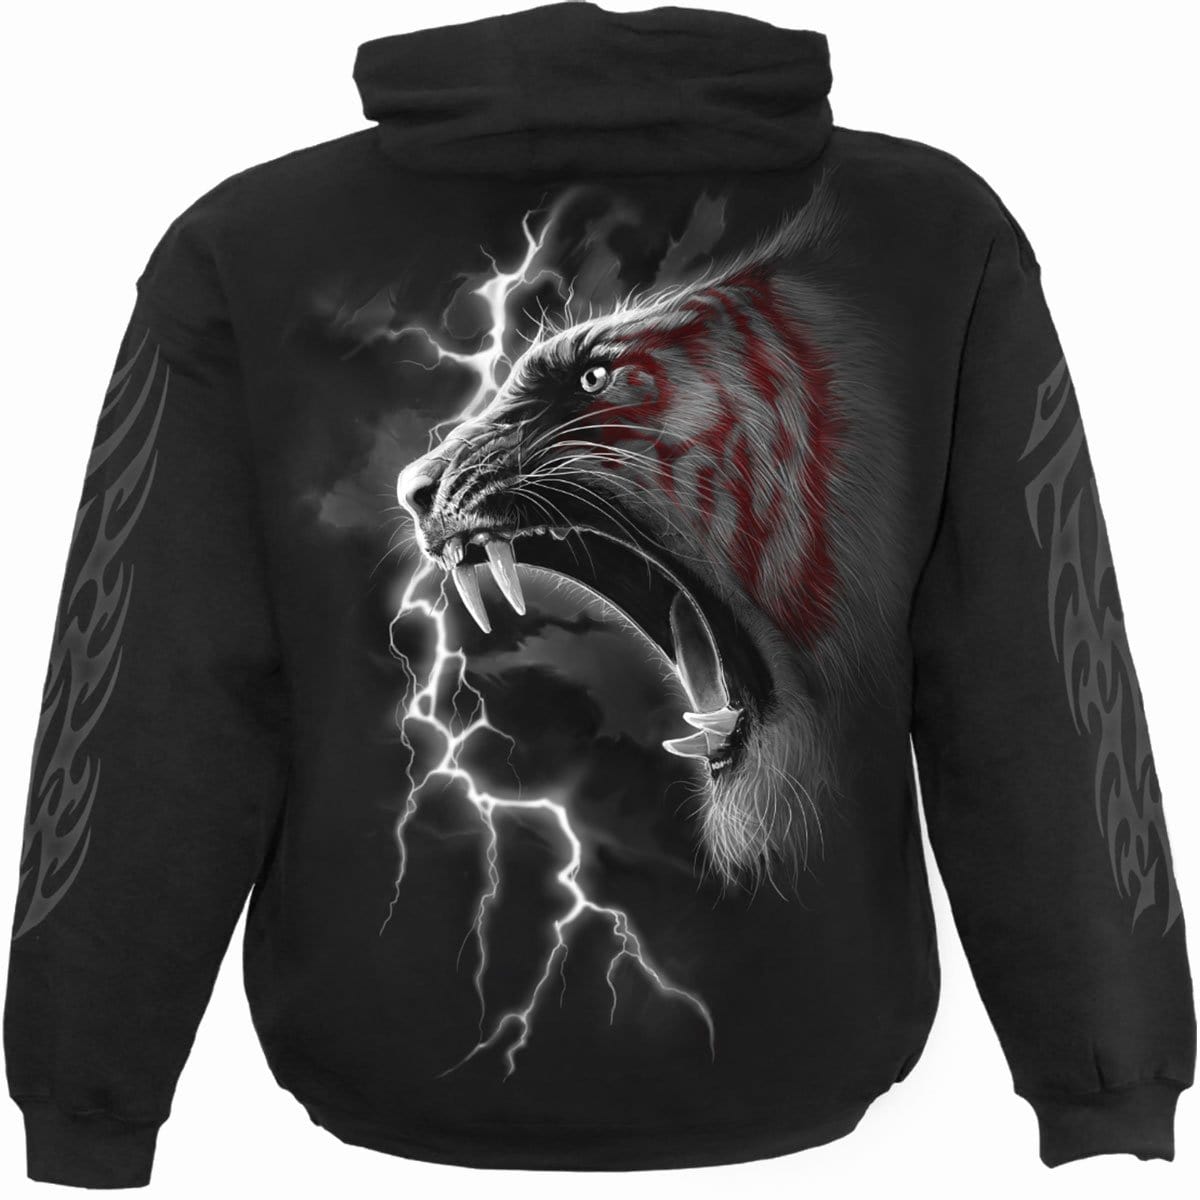 MARK OF THE TIGER - Hoody Black - Spiral USA